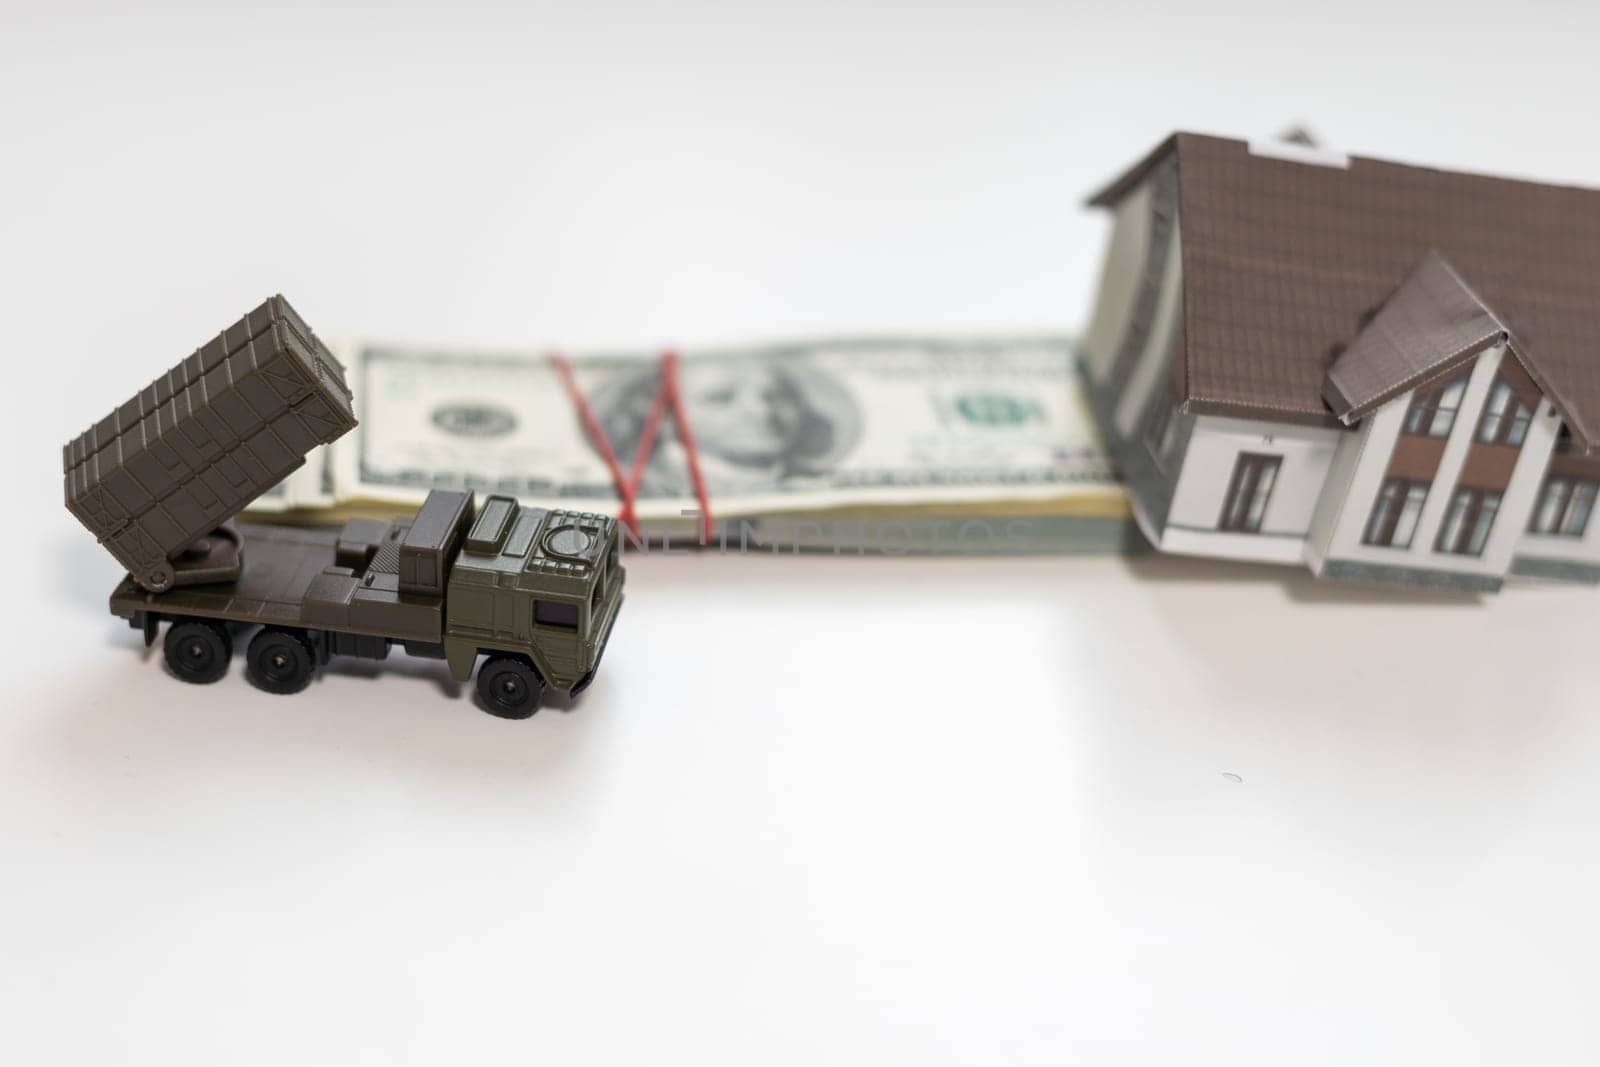 a toy military machine air defense and money by Andelov13